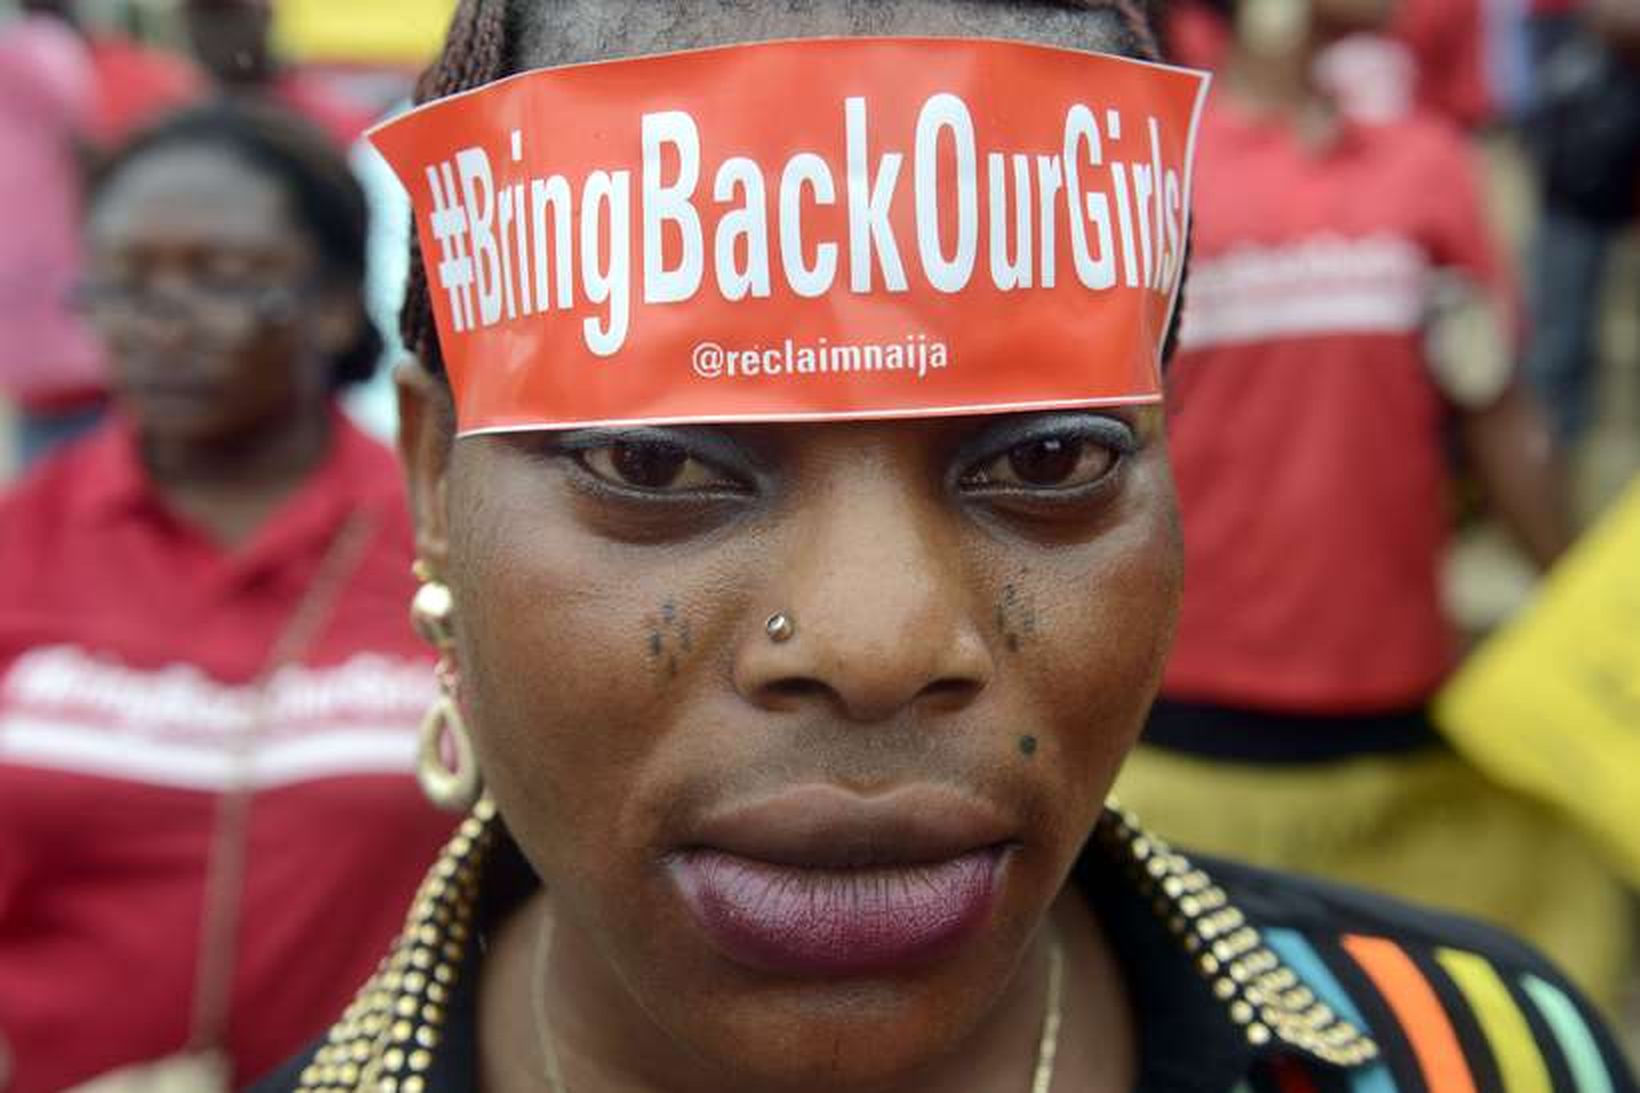 Bring back our girls